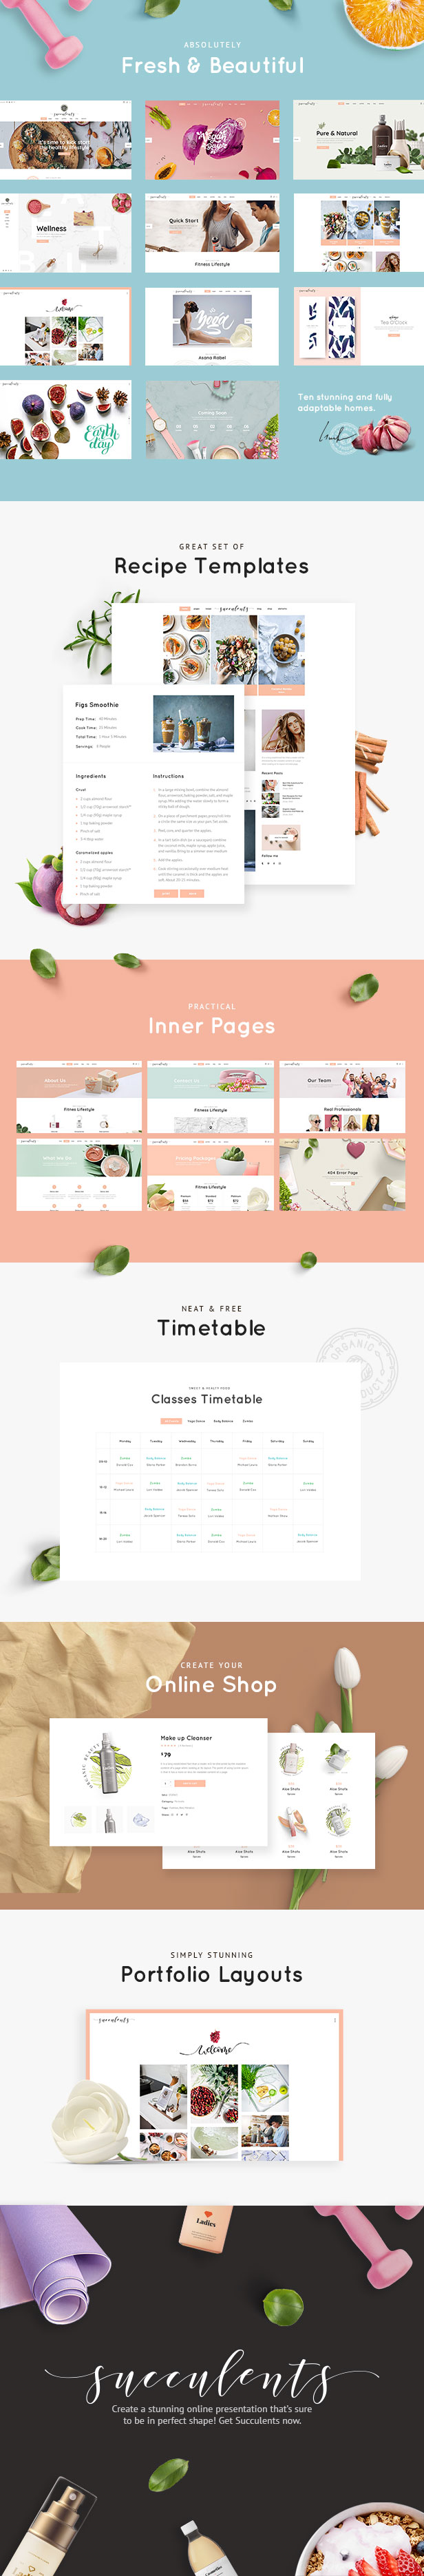 WordPress theme Succulents - A Healthy Lifestyle and Wellness Theme (Health & Beauty)